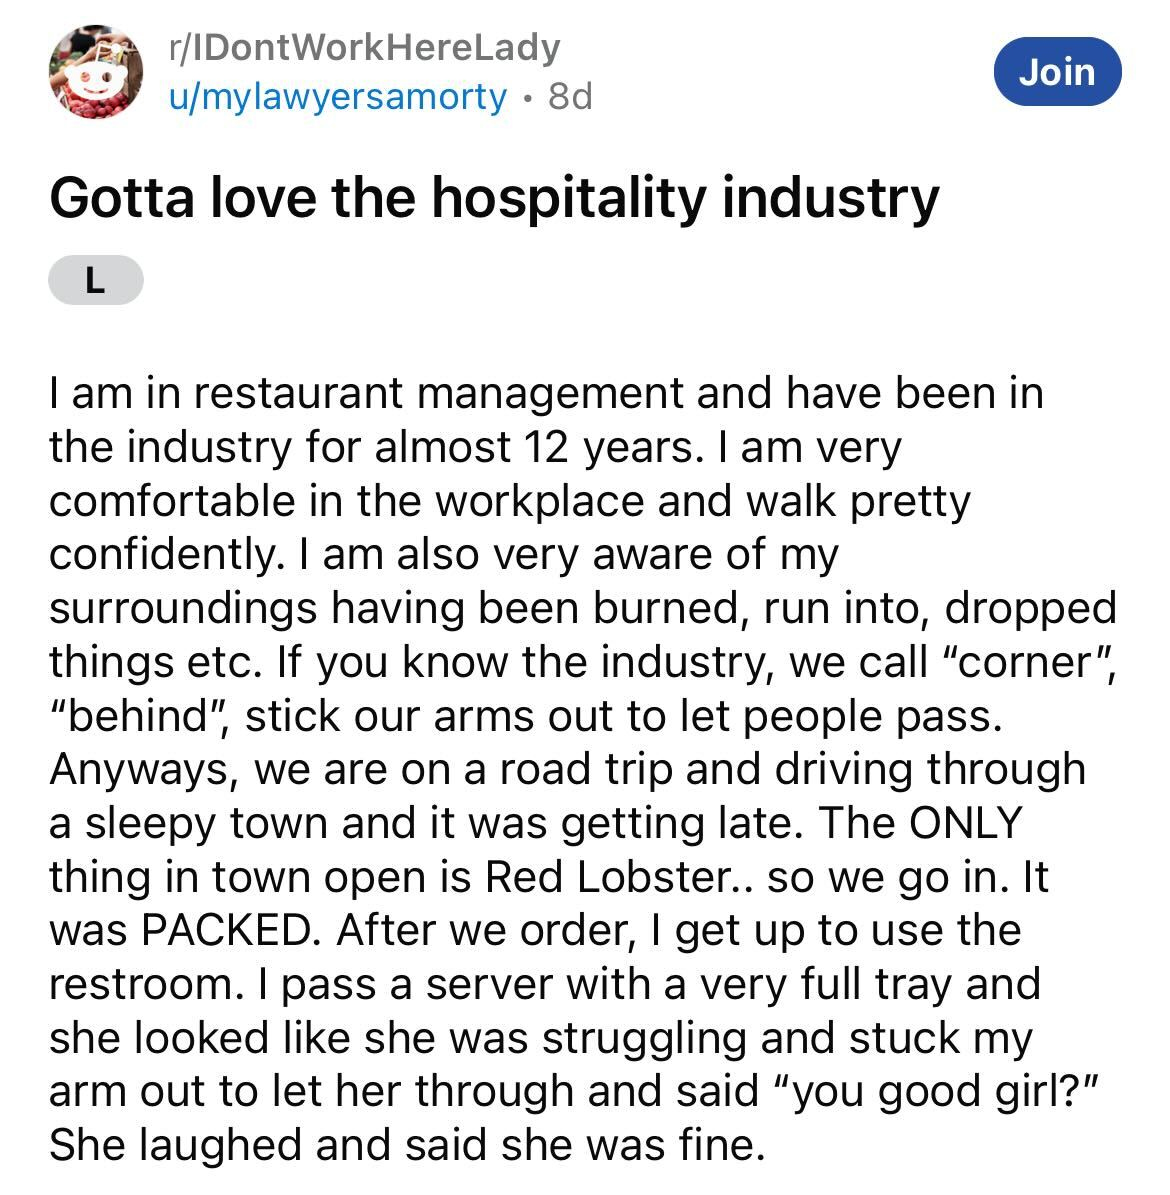 red lobster karen - document - rIDont WorkHereLady umylawyersamorty 8d Gotta love the hospitality industry L Join I am in restaurant management and have been in the industry for almost 12 years. I am very comfortable in the workplace and walk pretty confi